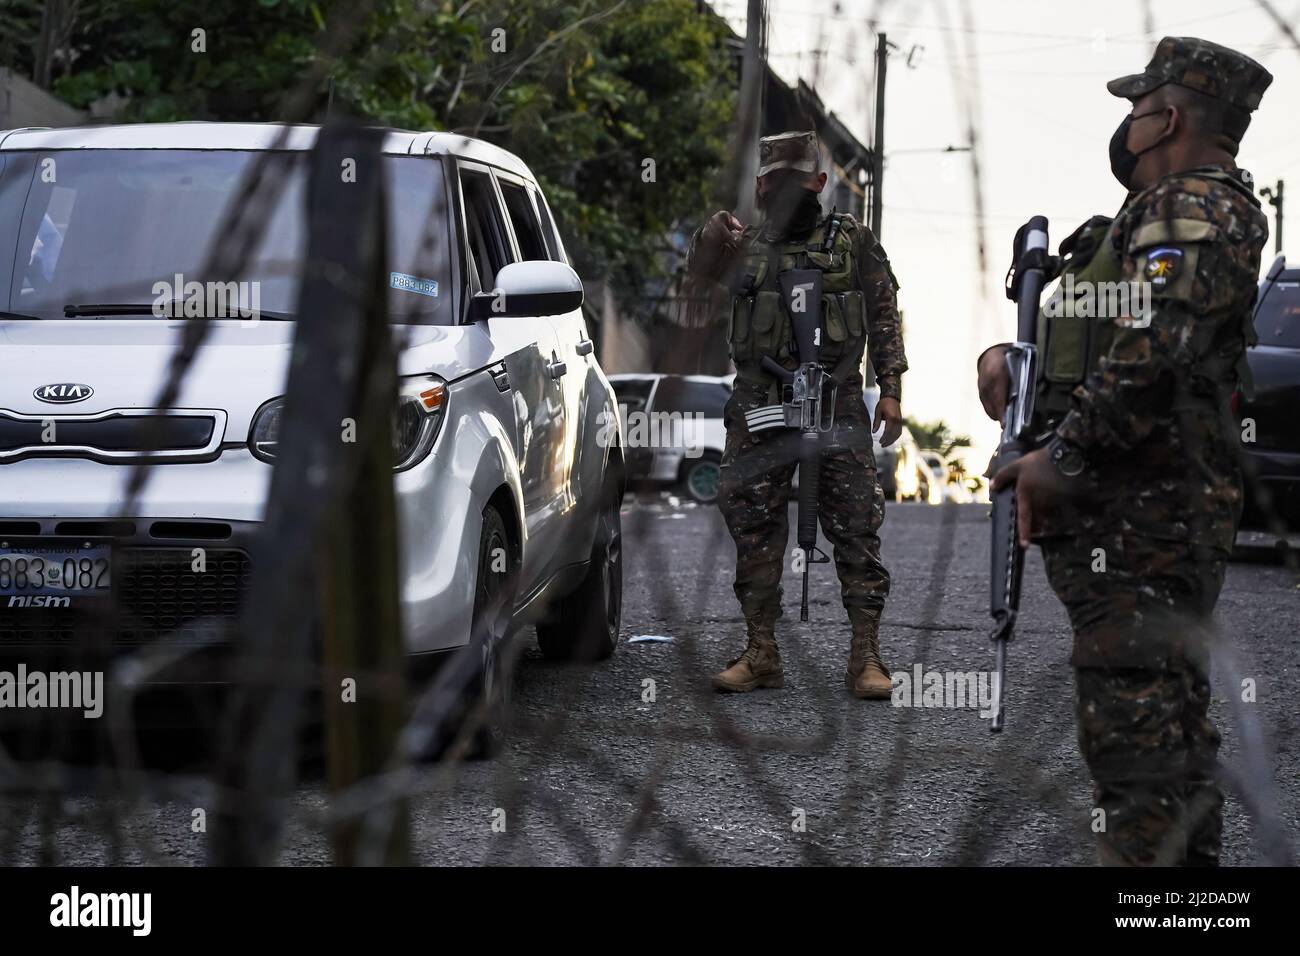 San Salvador, El Salvador. 30th Mar, 2022. A soldier guards a checkpoint at a Mara Salvatrucha MS-13 controlled community. On Sunday, March 27, the Salvadoran Congress approved a State of Emergency after the country registered its highest ever daily murder toll, with 62 homicides recorded, due to gang-related violence. According to the Salvadoran government, more than 3,000 alleged gang members from the MS-13 and Barrio 18 gangs have been detained. Credit: SOPA Images Limited/Alamy Live News Stock Photo